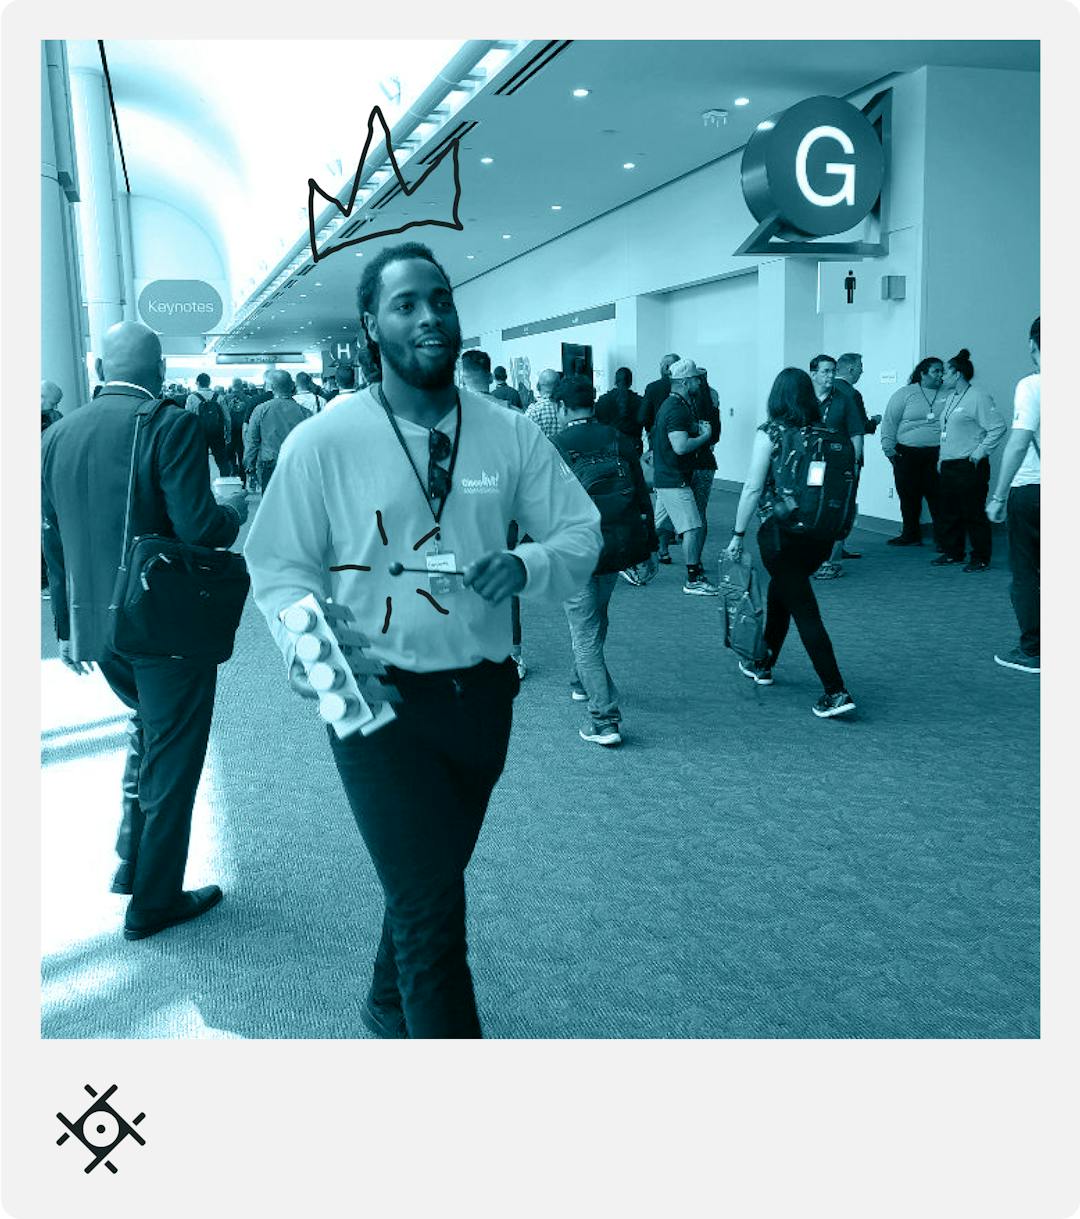 Polaroid-style photo of an event ambassador at the CiscoLive event